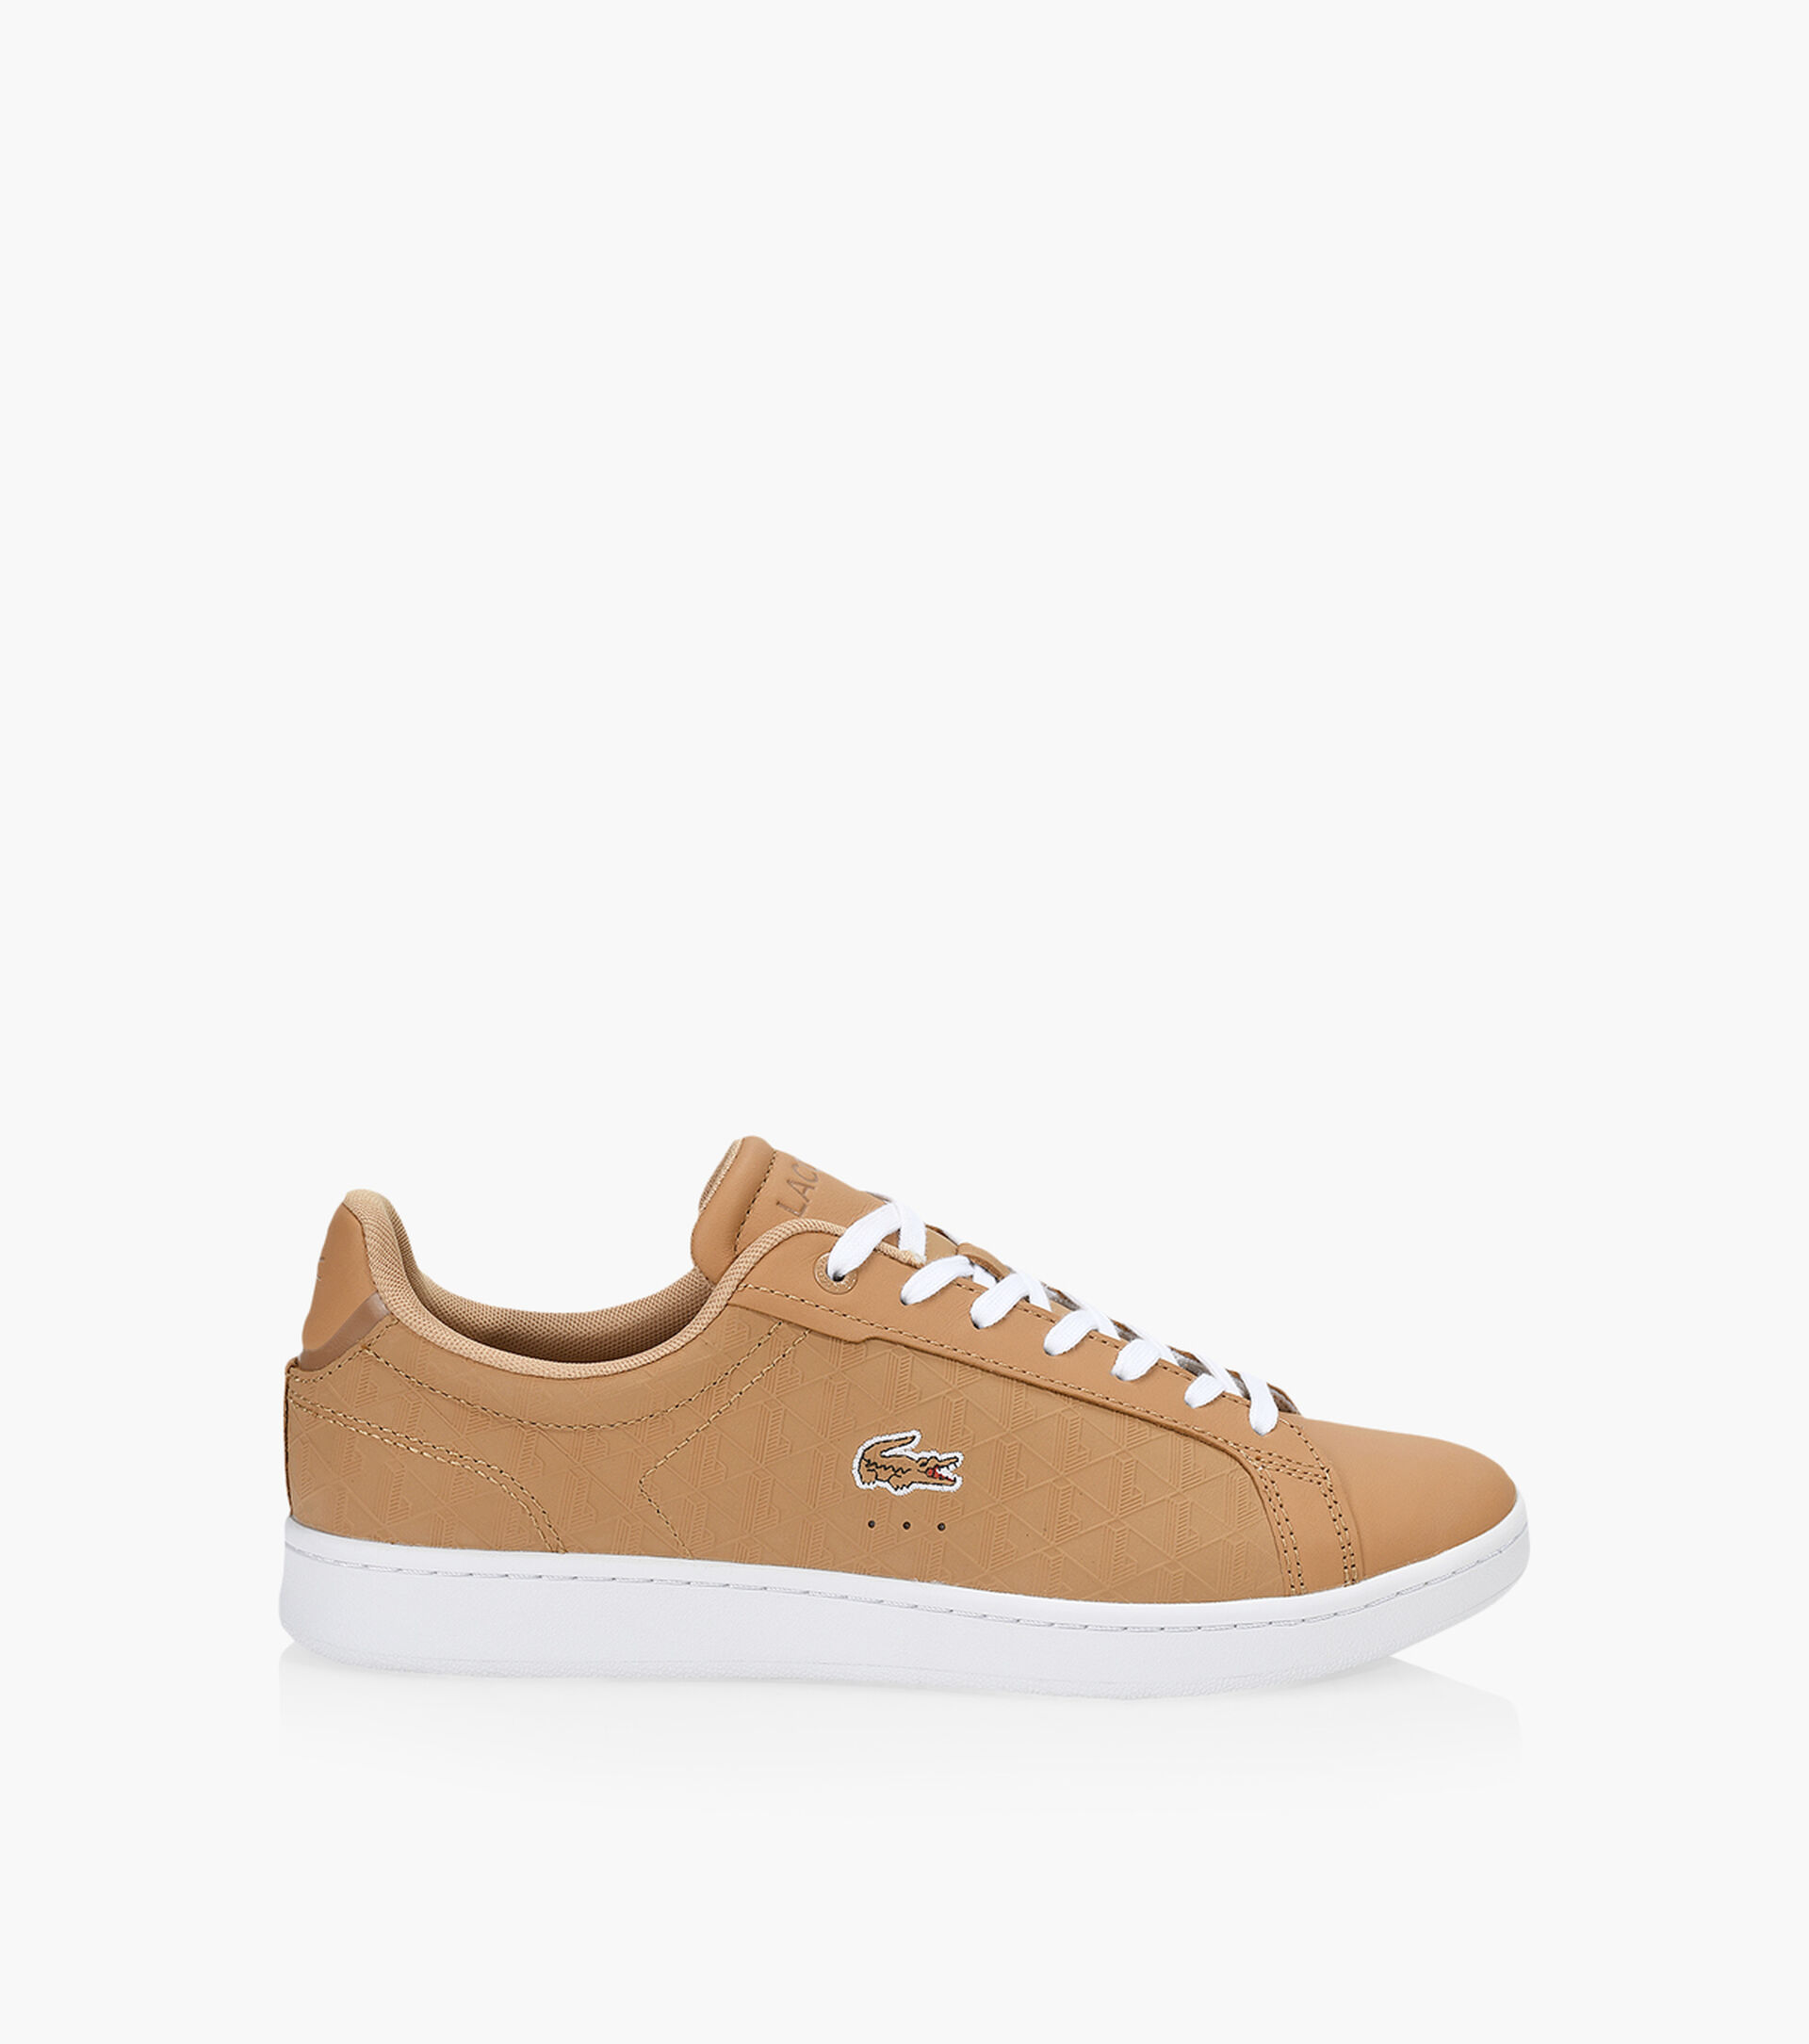 LACOSTE CARNABY PRO - Cuir Tan | Browns Shoes